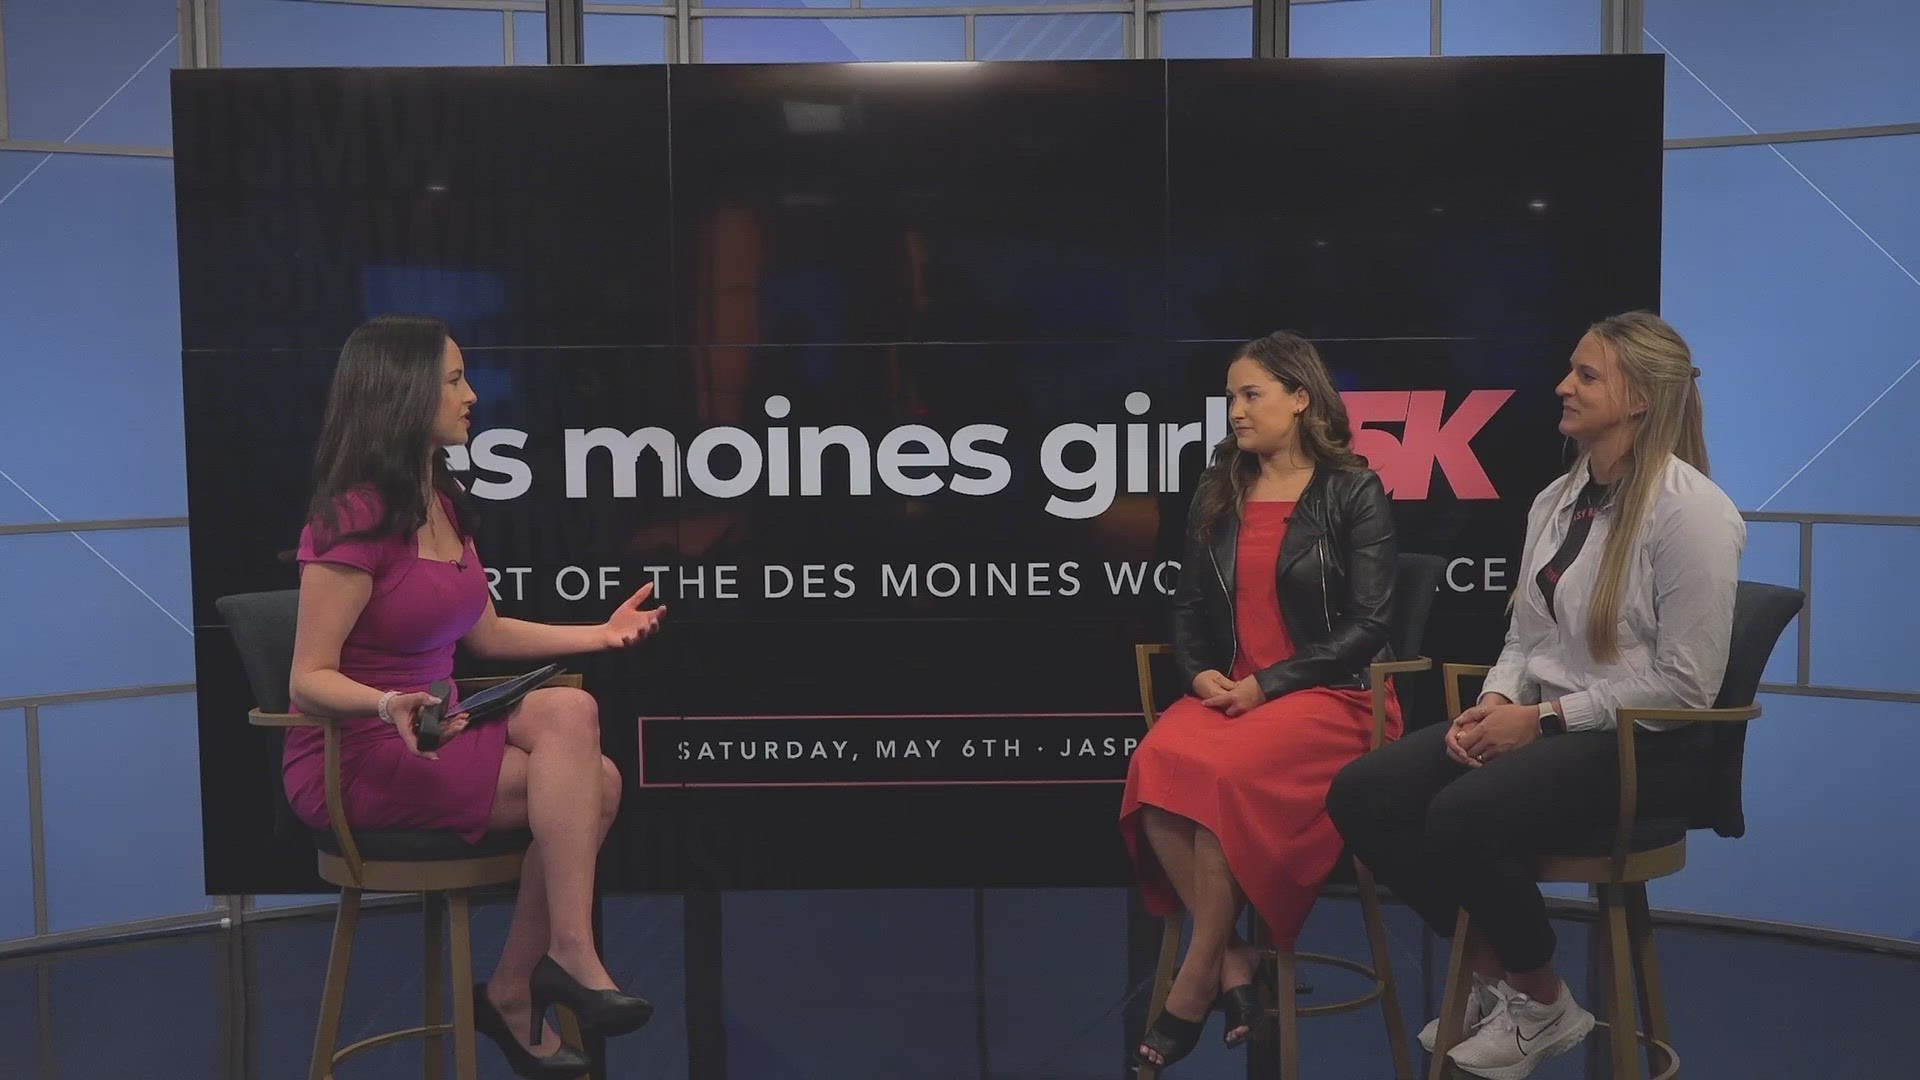 The Des Moines Girl 5K is designed to provide a perfect outing for women in our communities to connect and engage. Visit desmoinesgirl.com to learn more.